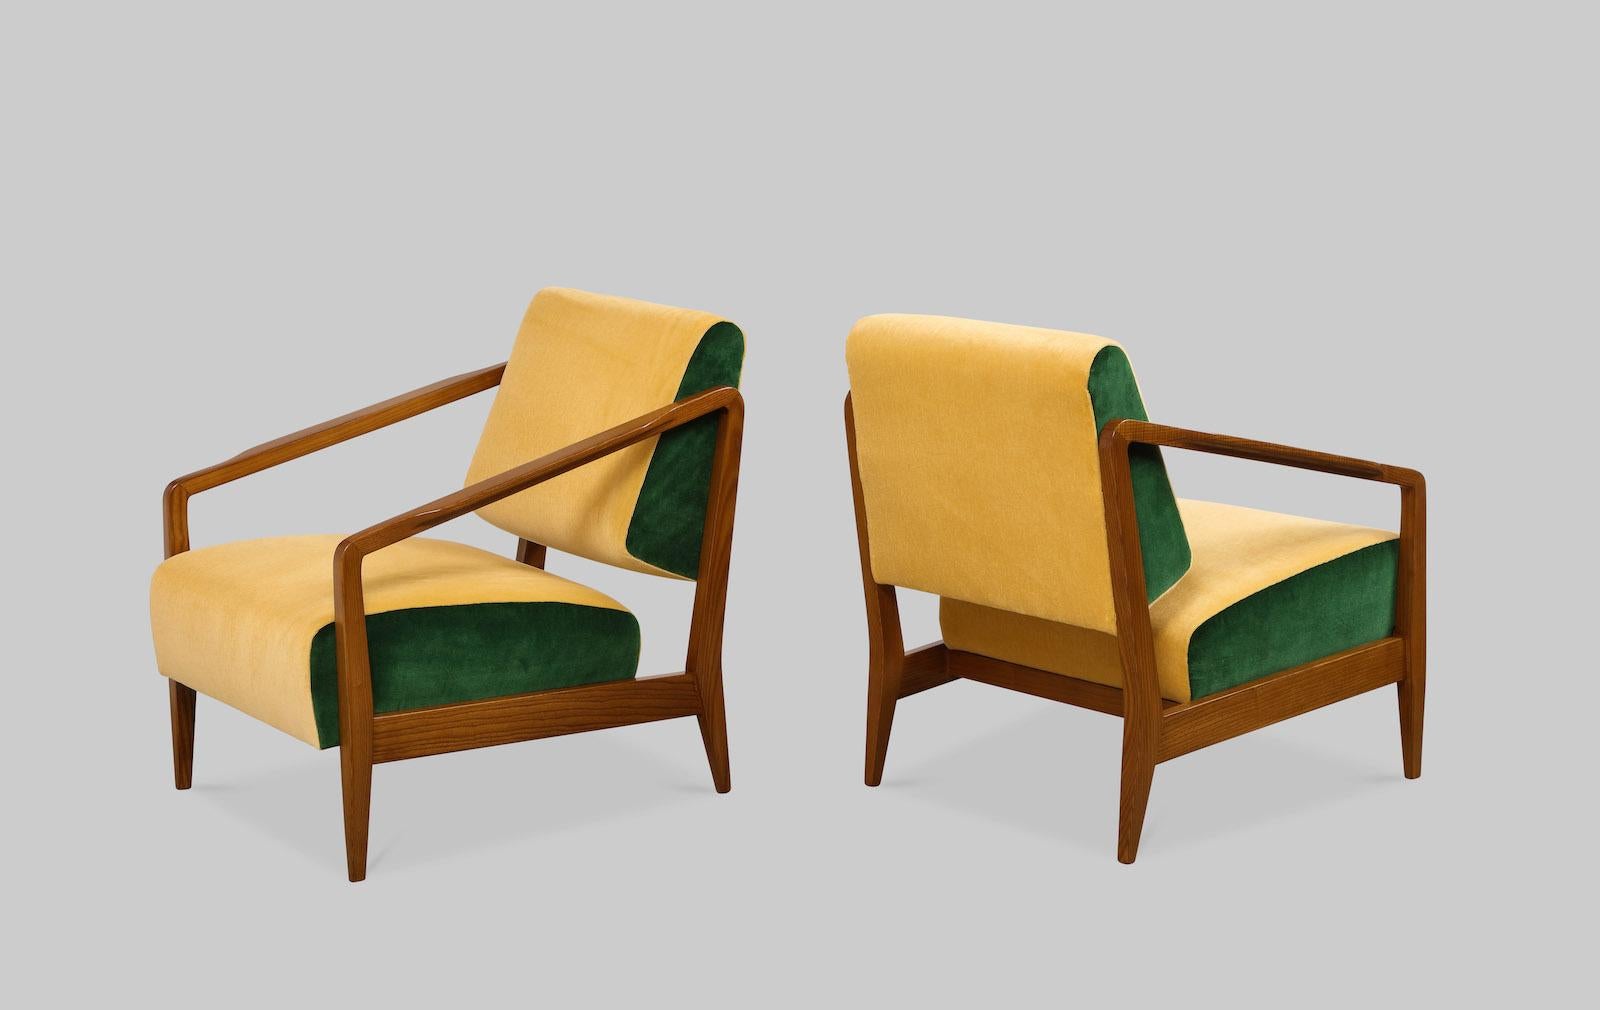 Rare pair of lounge chairs by Gio Ponti. Produced by Isa, Bergamo in very limited numbers. Oak frames, and upholstered seats and backs. Great graphic form. Published: Gio Ponti: 'Idee' d'arte e di architettura a Imola e in Romagna. F. Bertoni, Pg.